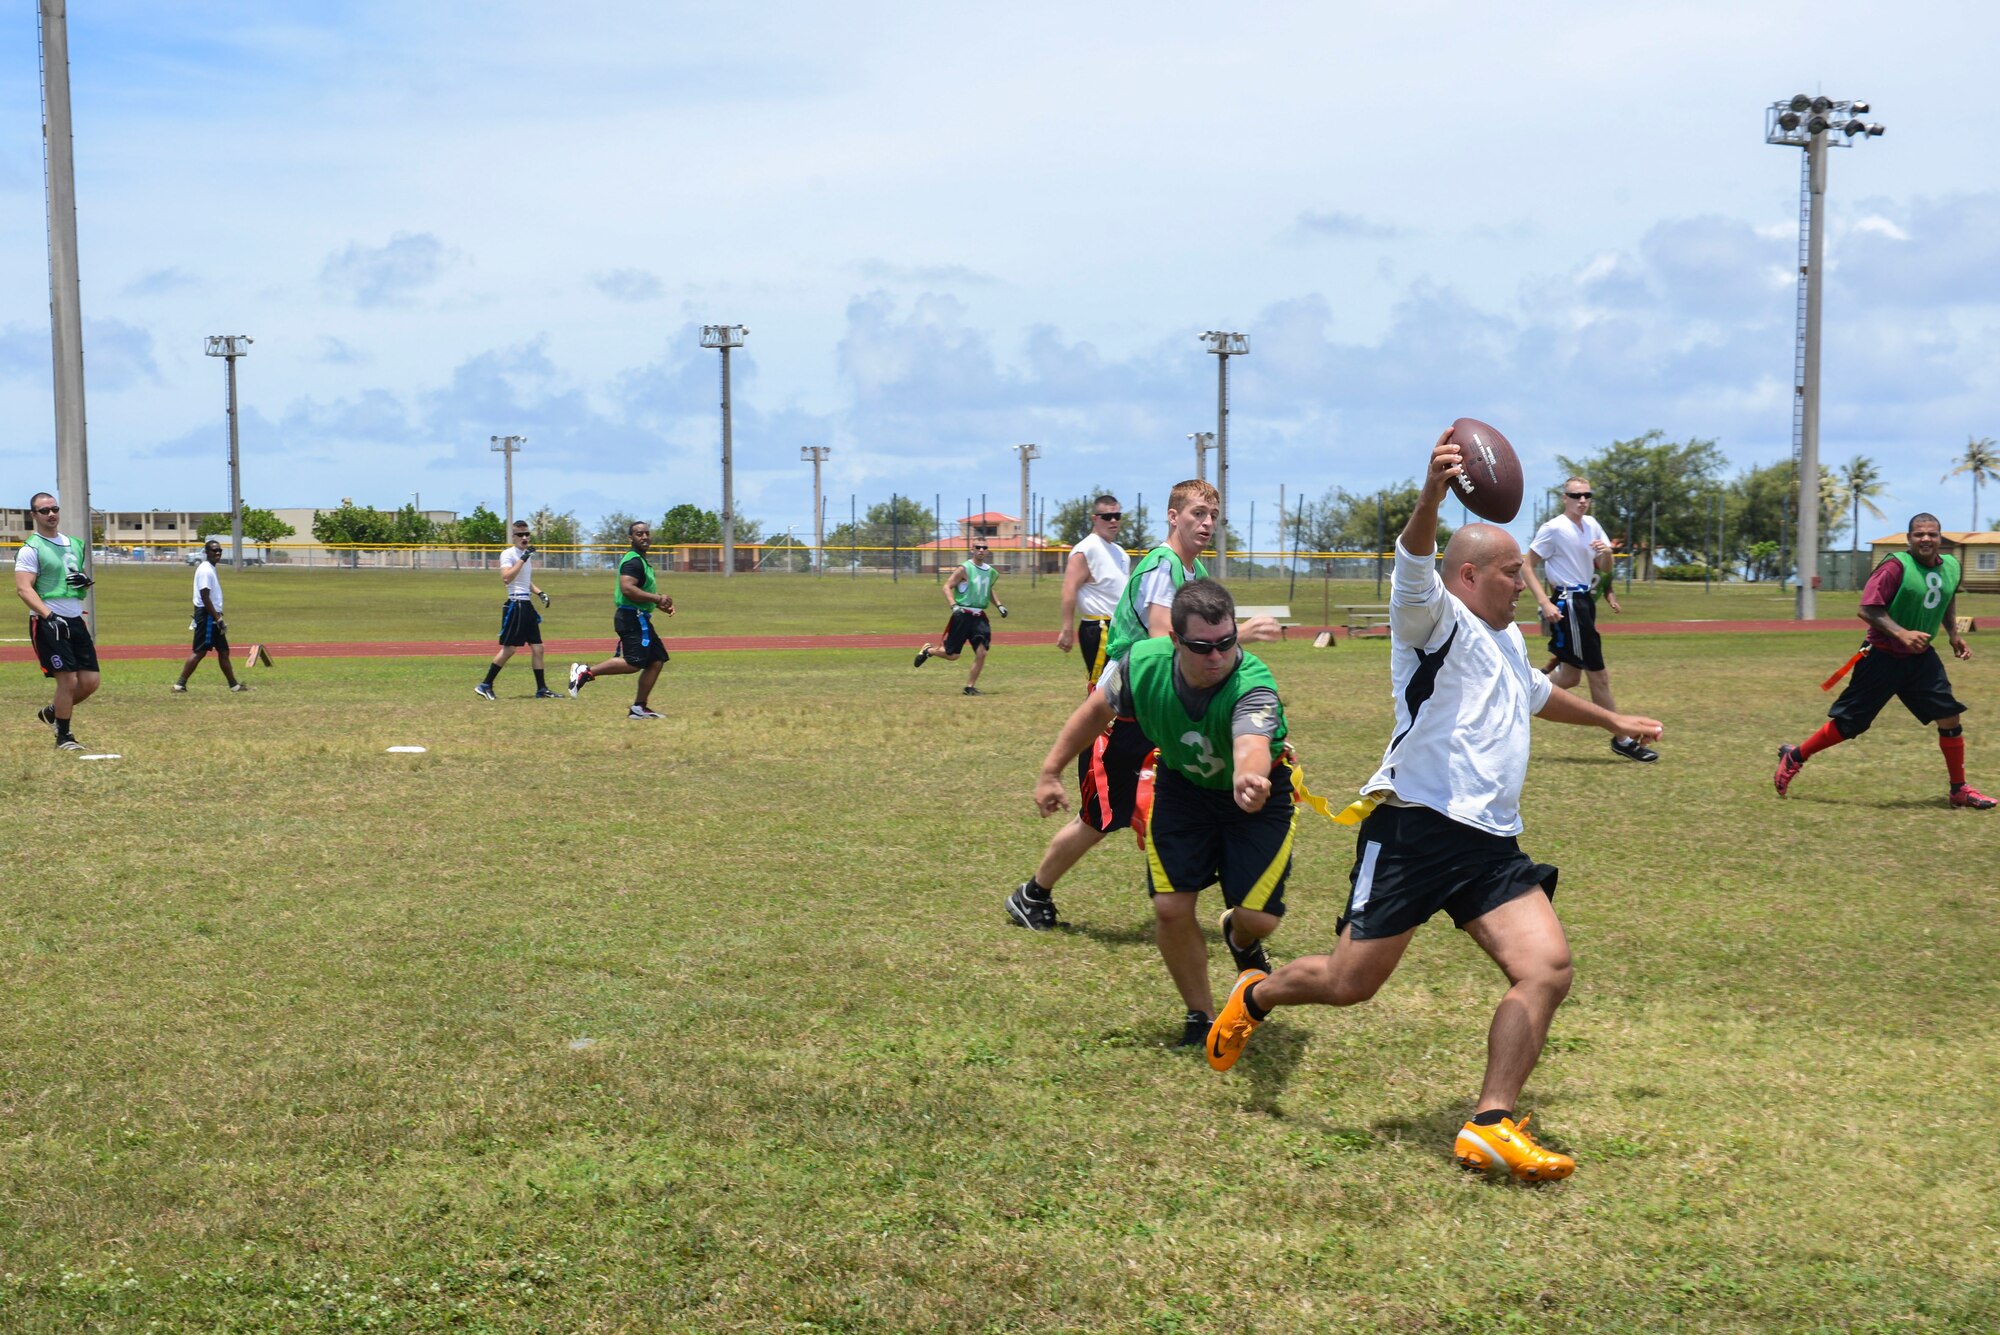 Rich Rollins, 736th Security Forces Squadron, evades a 36th Security Forces Squadron defender during the Battle of the Badges Flag Football Tournament on Andersen Air Force Base, Guam May 13, 2014. The security forces members played an intramural football game as a part of National Police Week along with several other events held that week. (U.S. Air Force photo by Airman 1st Class Adarius Petty/Released)